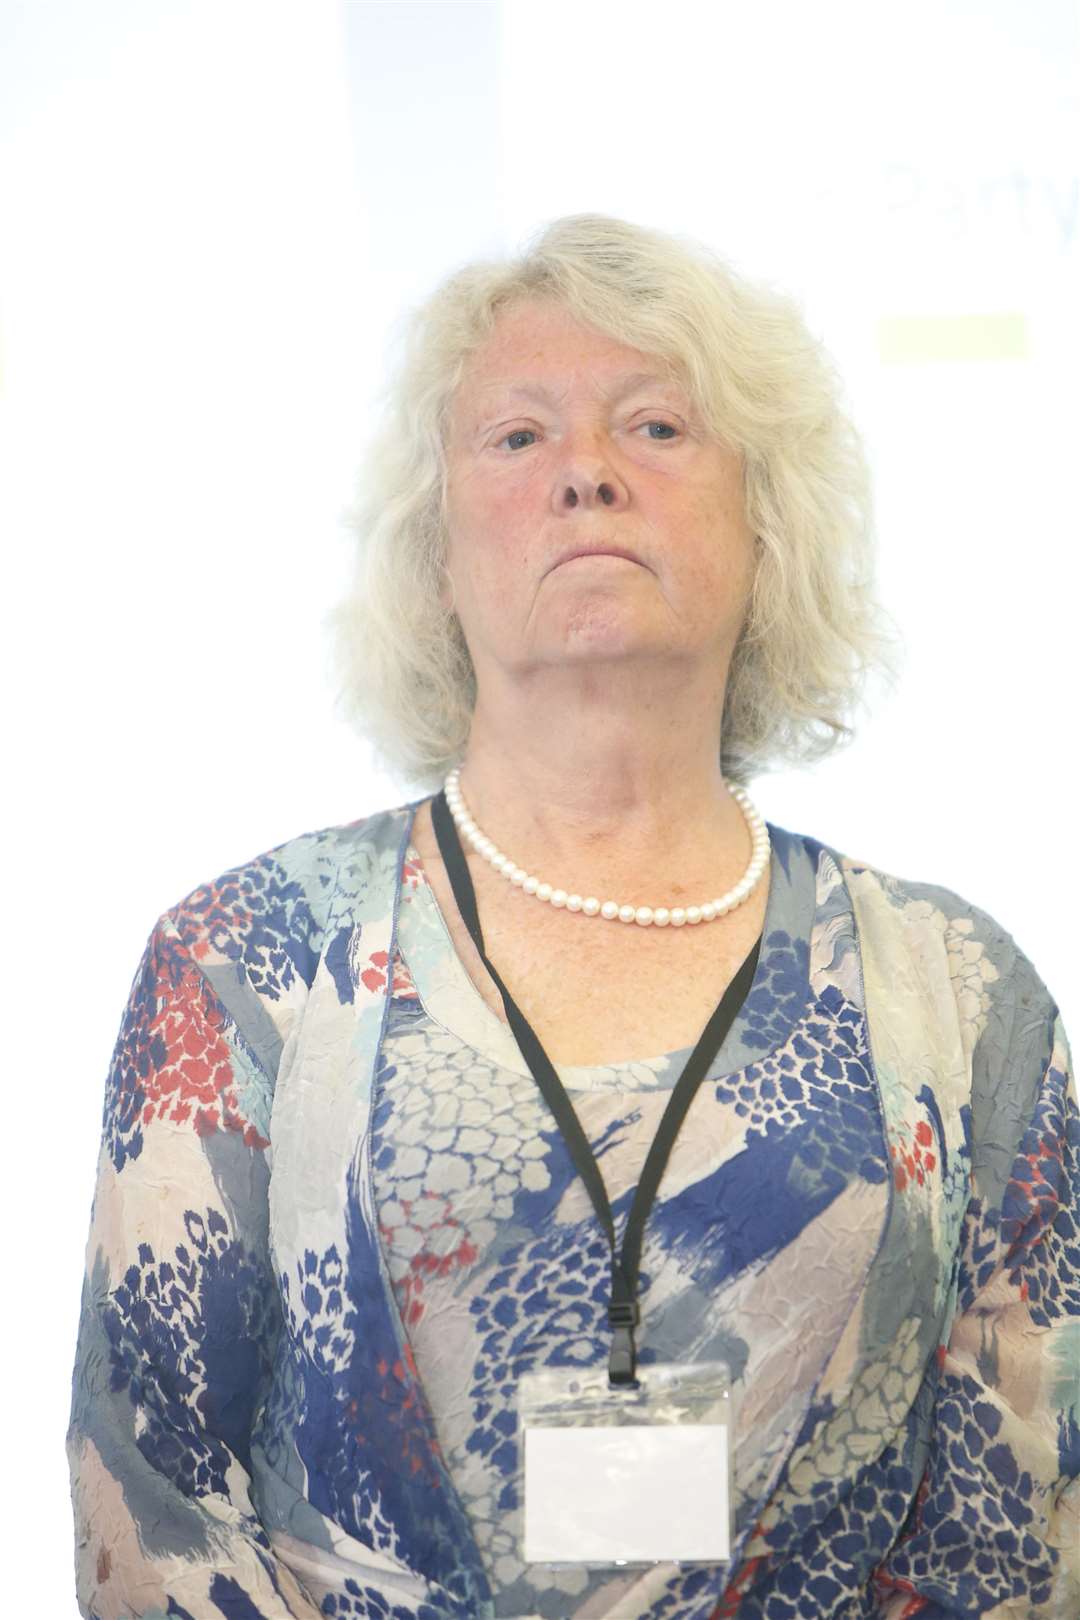 Yolande Kenward is standing as an independent candidate in Maidstone and the Weald